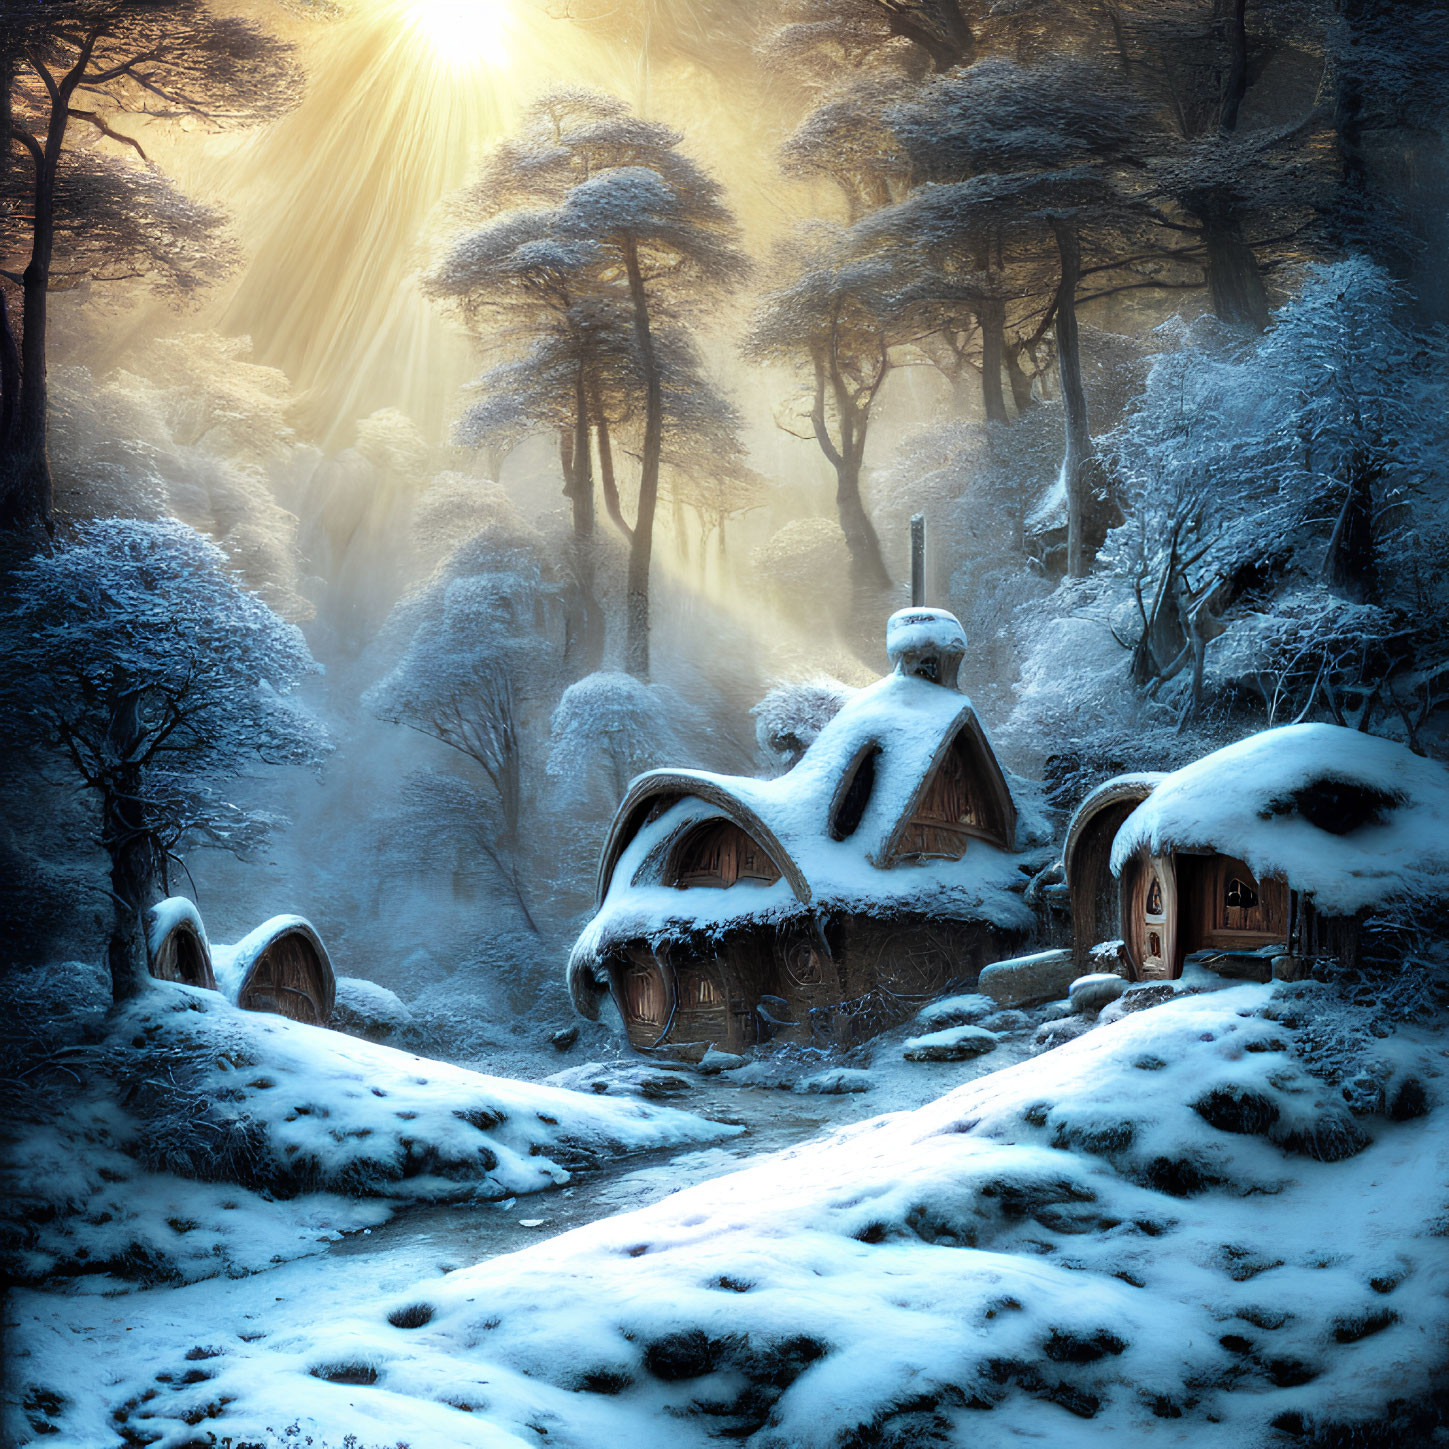 Snow-covered forest with fairy-tale houses and sun rays piercing mist.